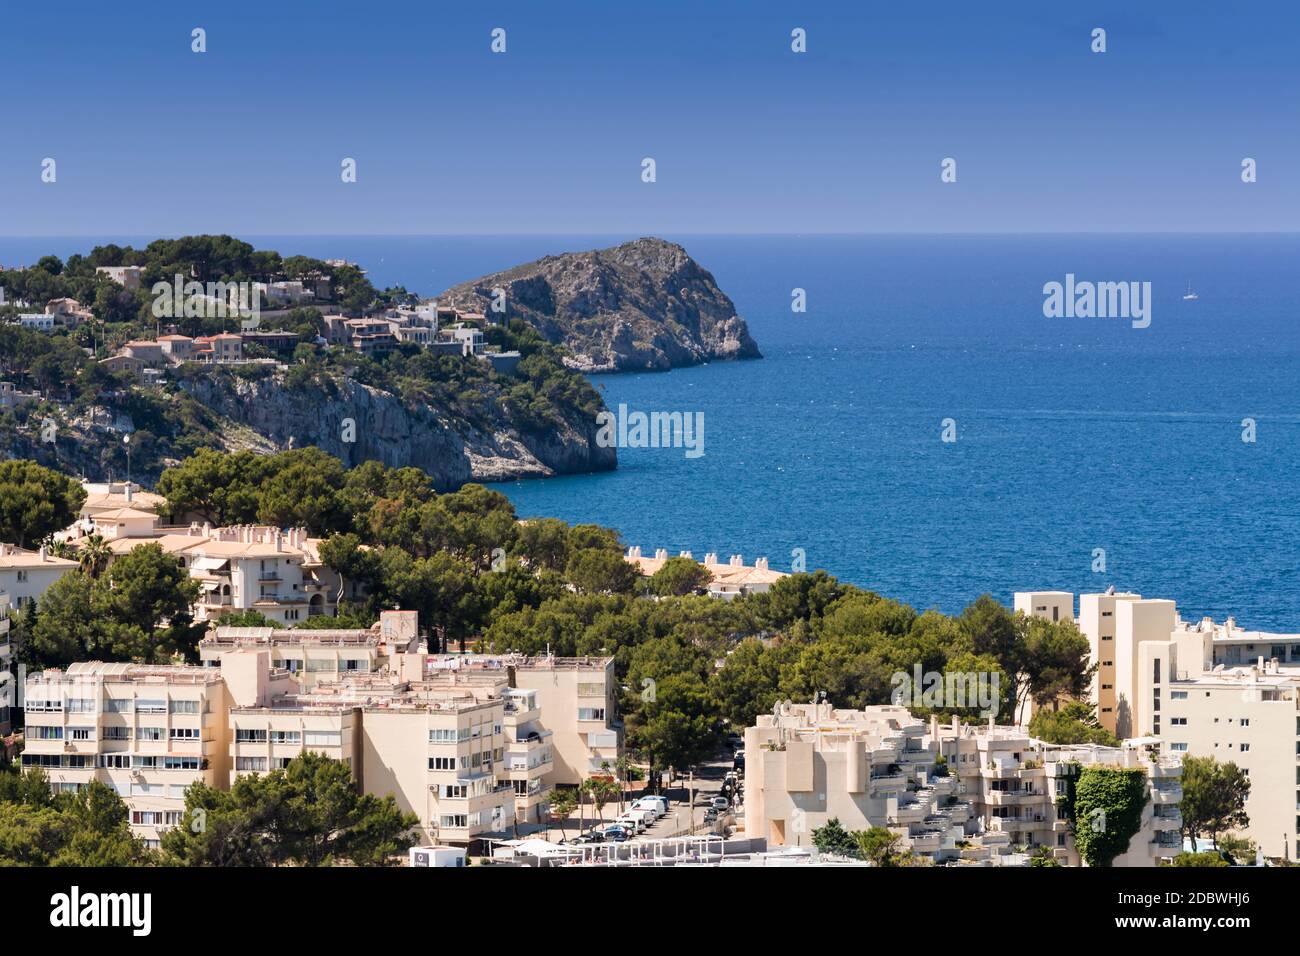 Panorama of the bay Paguera photographed from the mountain in Costa de la Calma. Stock Photo